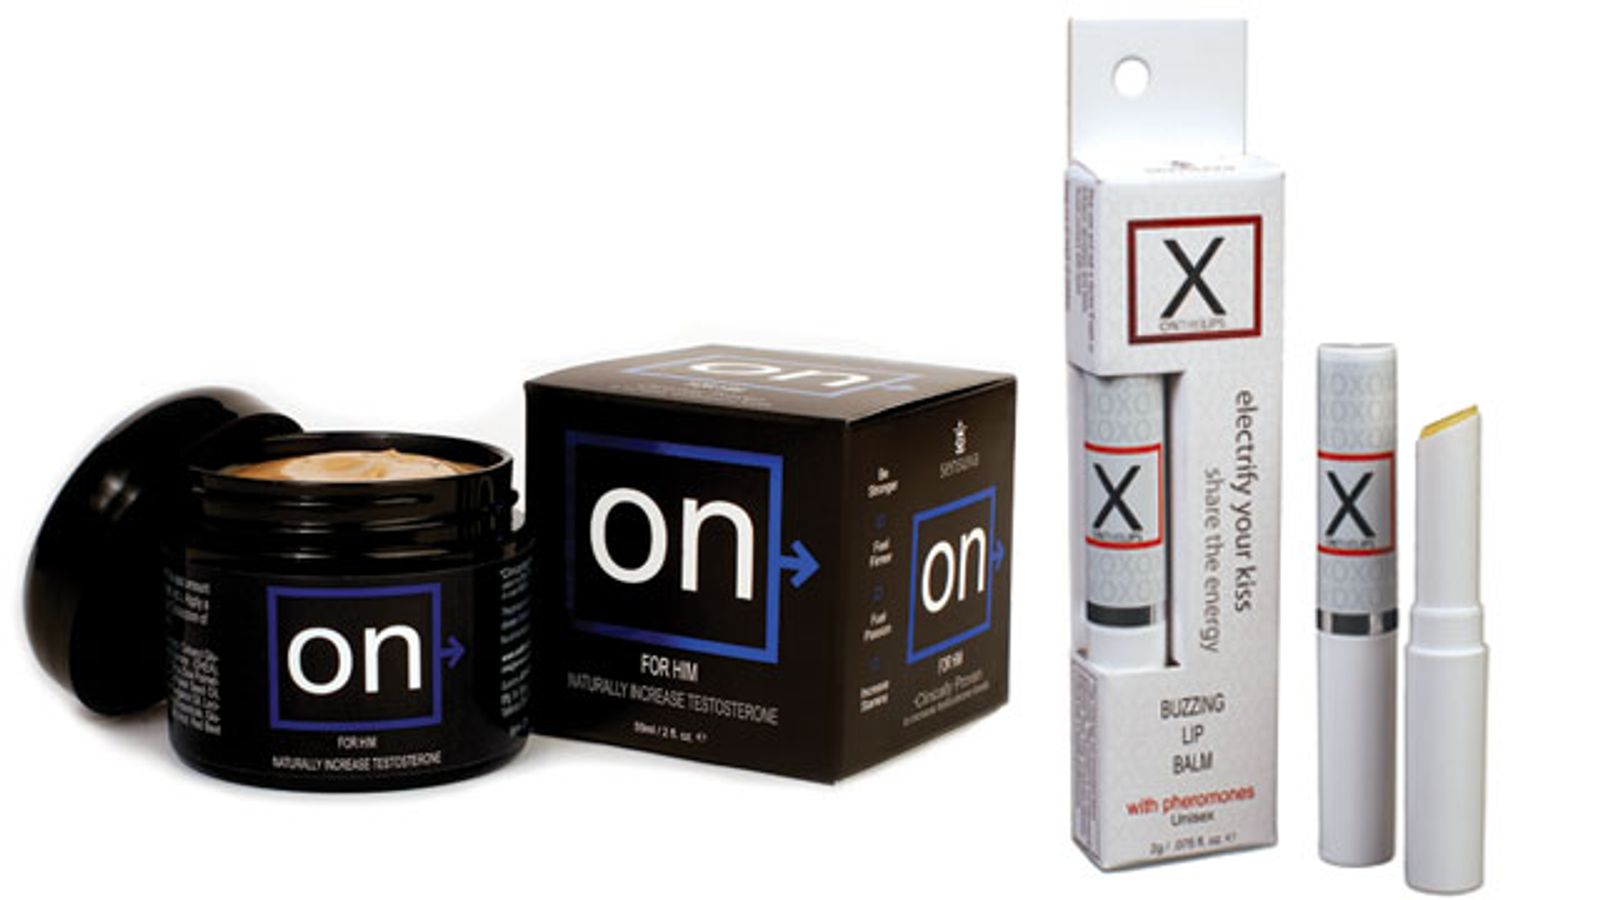 Entrenue Debuts ON for Him, X On the Lips Natural Sexual Enhancement Products